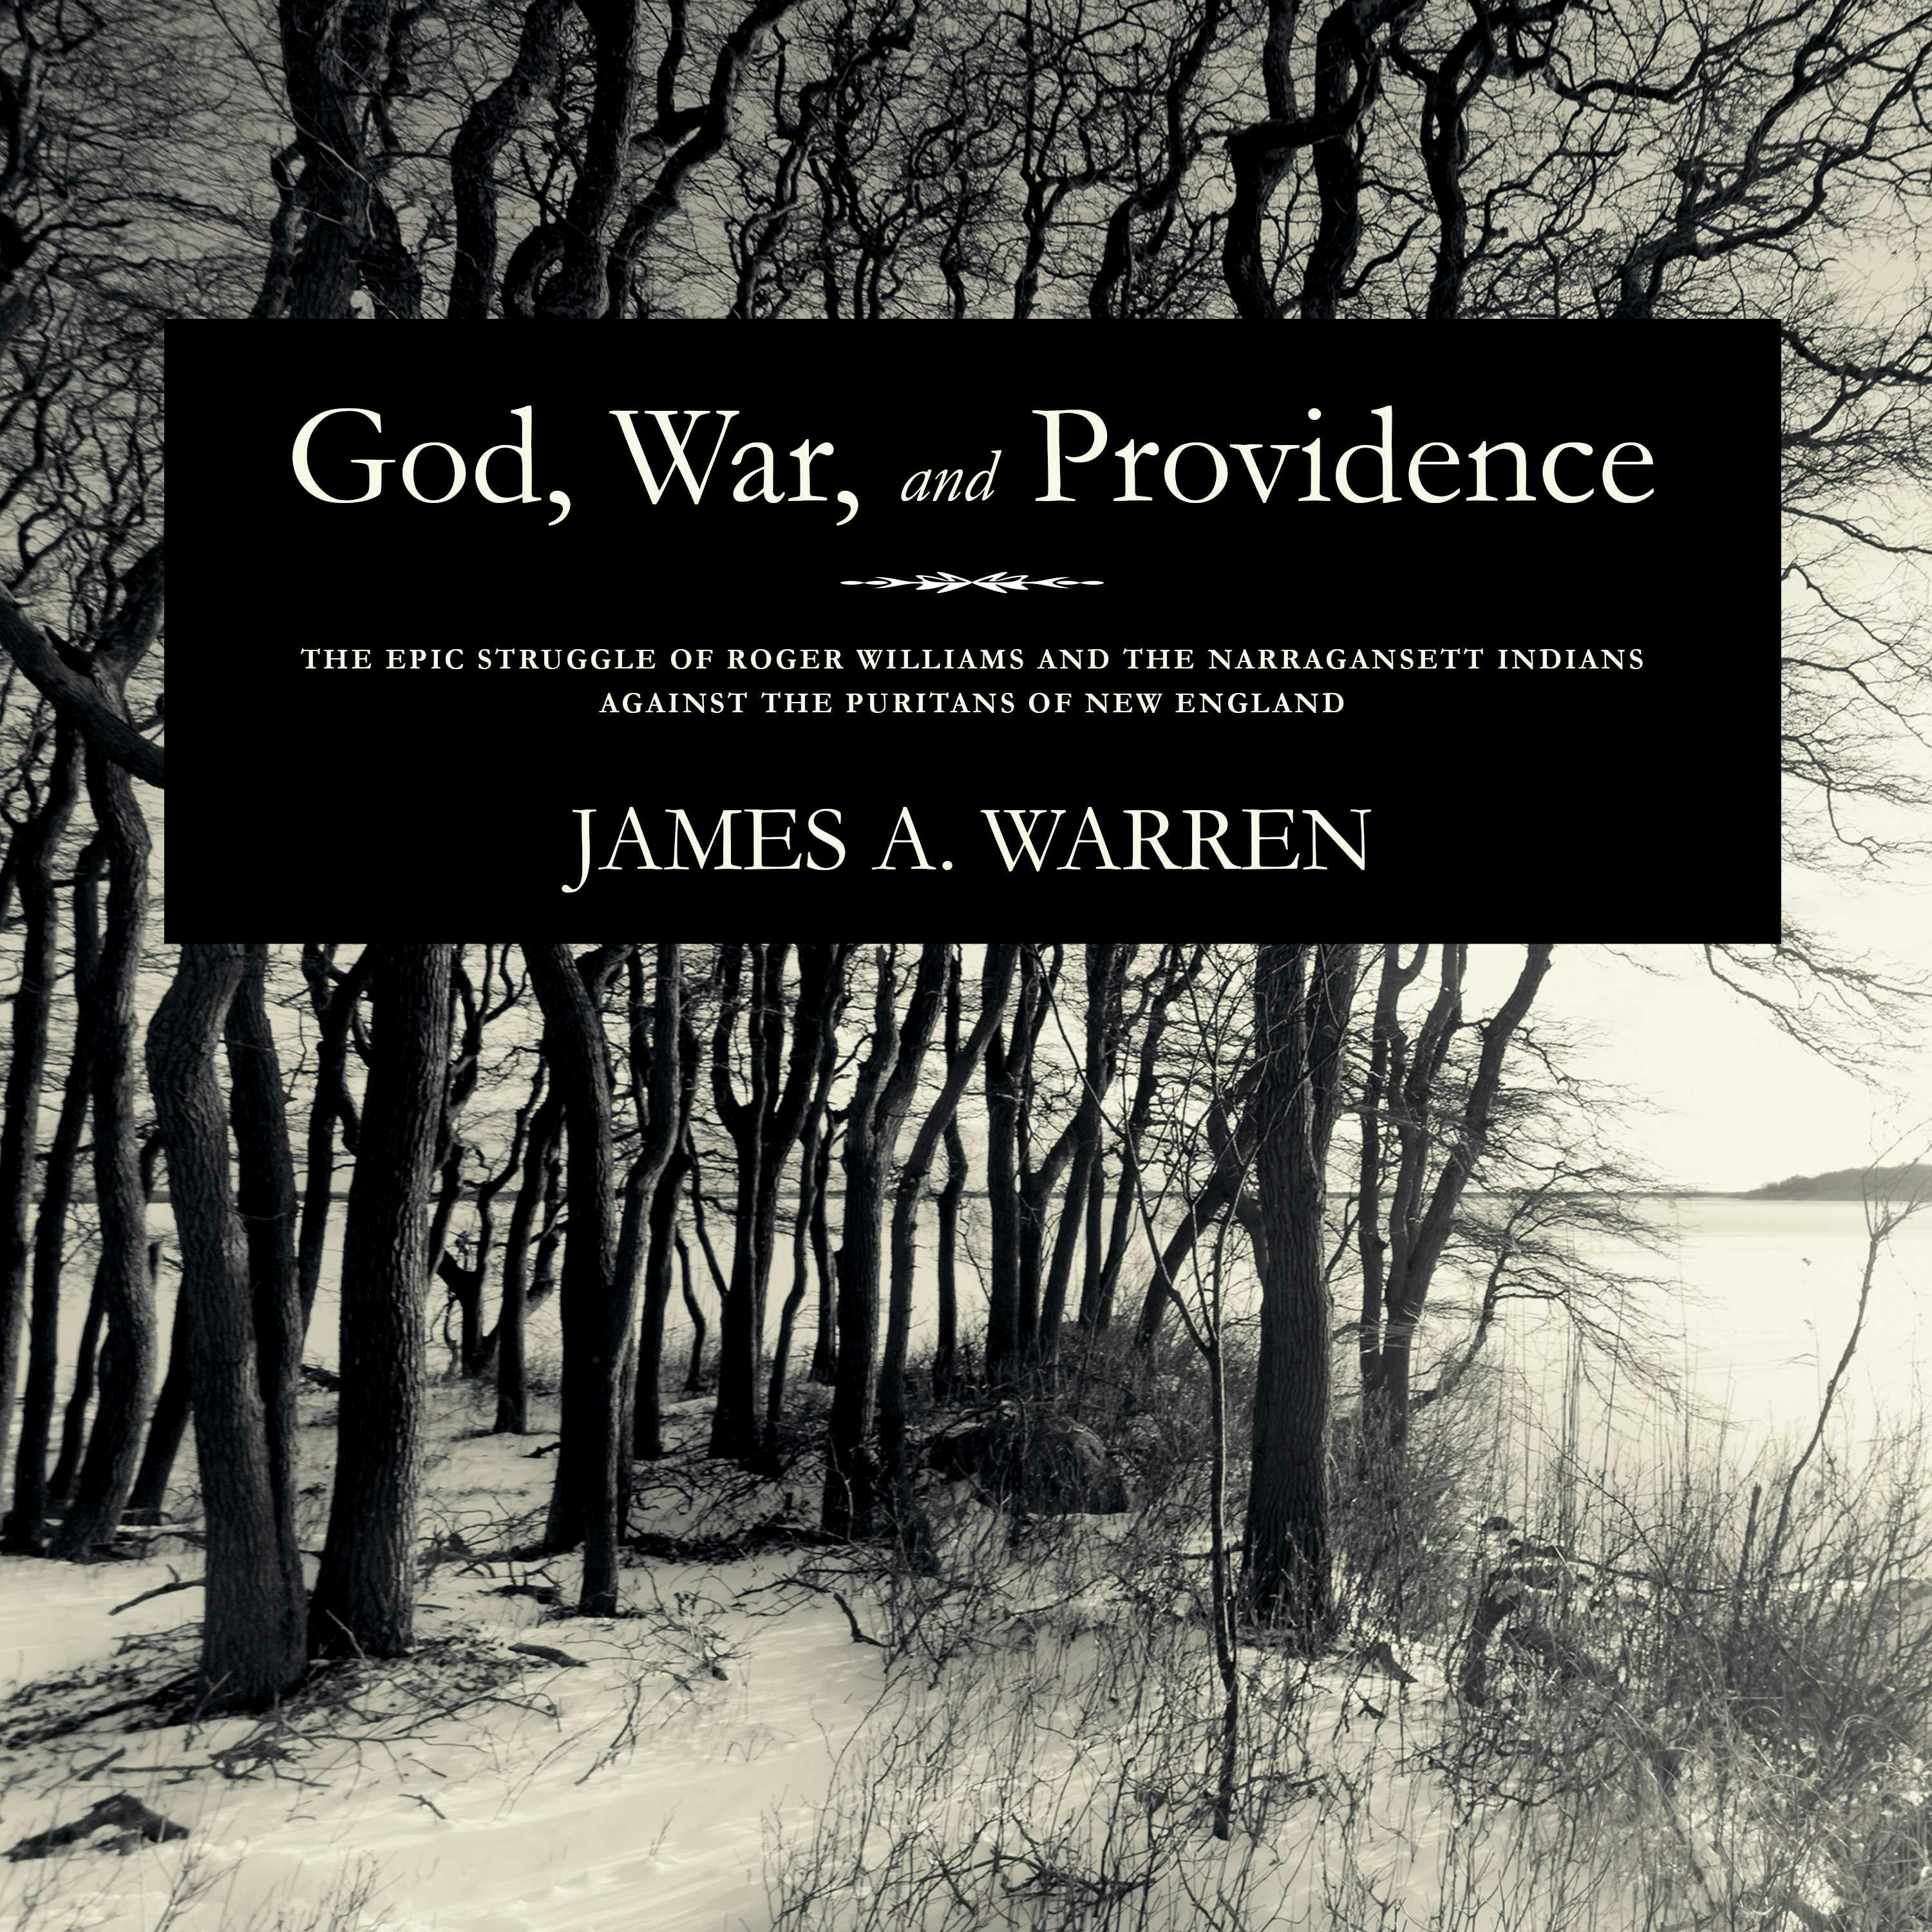 God, War, and Providence: The Epic Struggle of Roger Williams and the Narragansett Indians against the Puritans of New England - James A. Warren